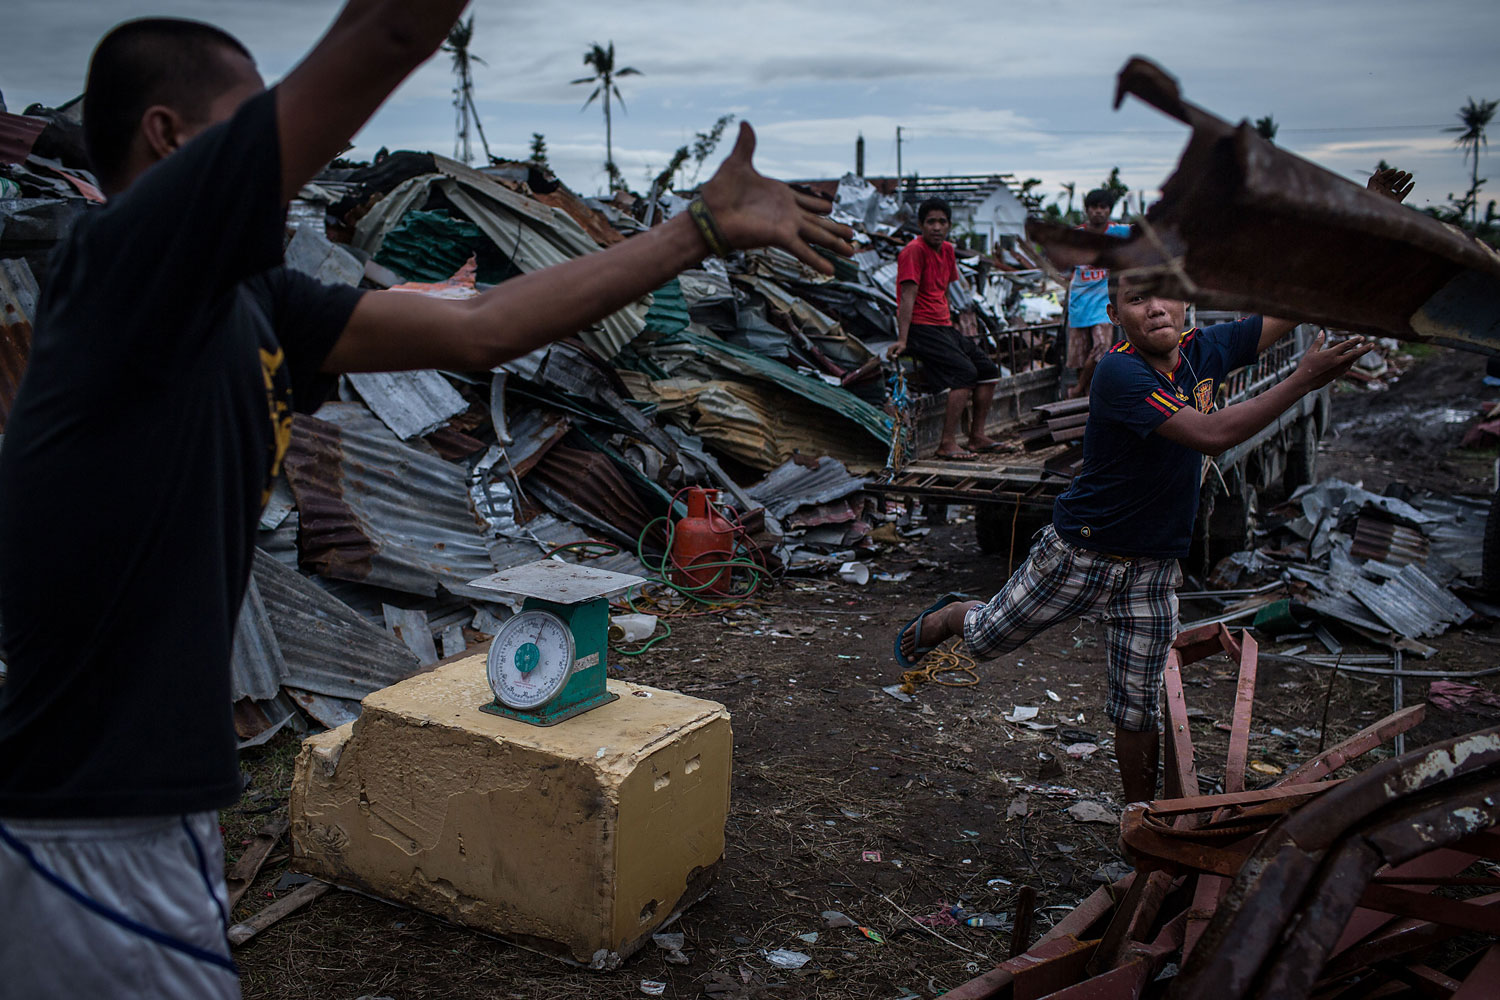 Workers at a junkyard throw scrap metal on a pile after weighing it on April 16, 2014 in Tacloban.